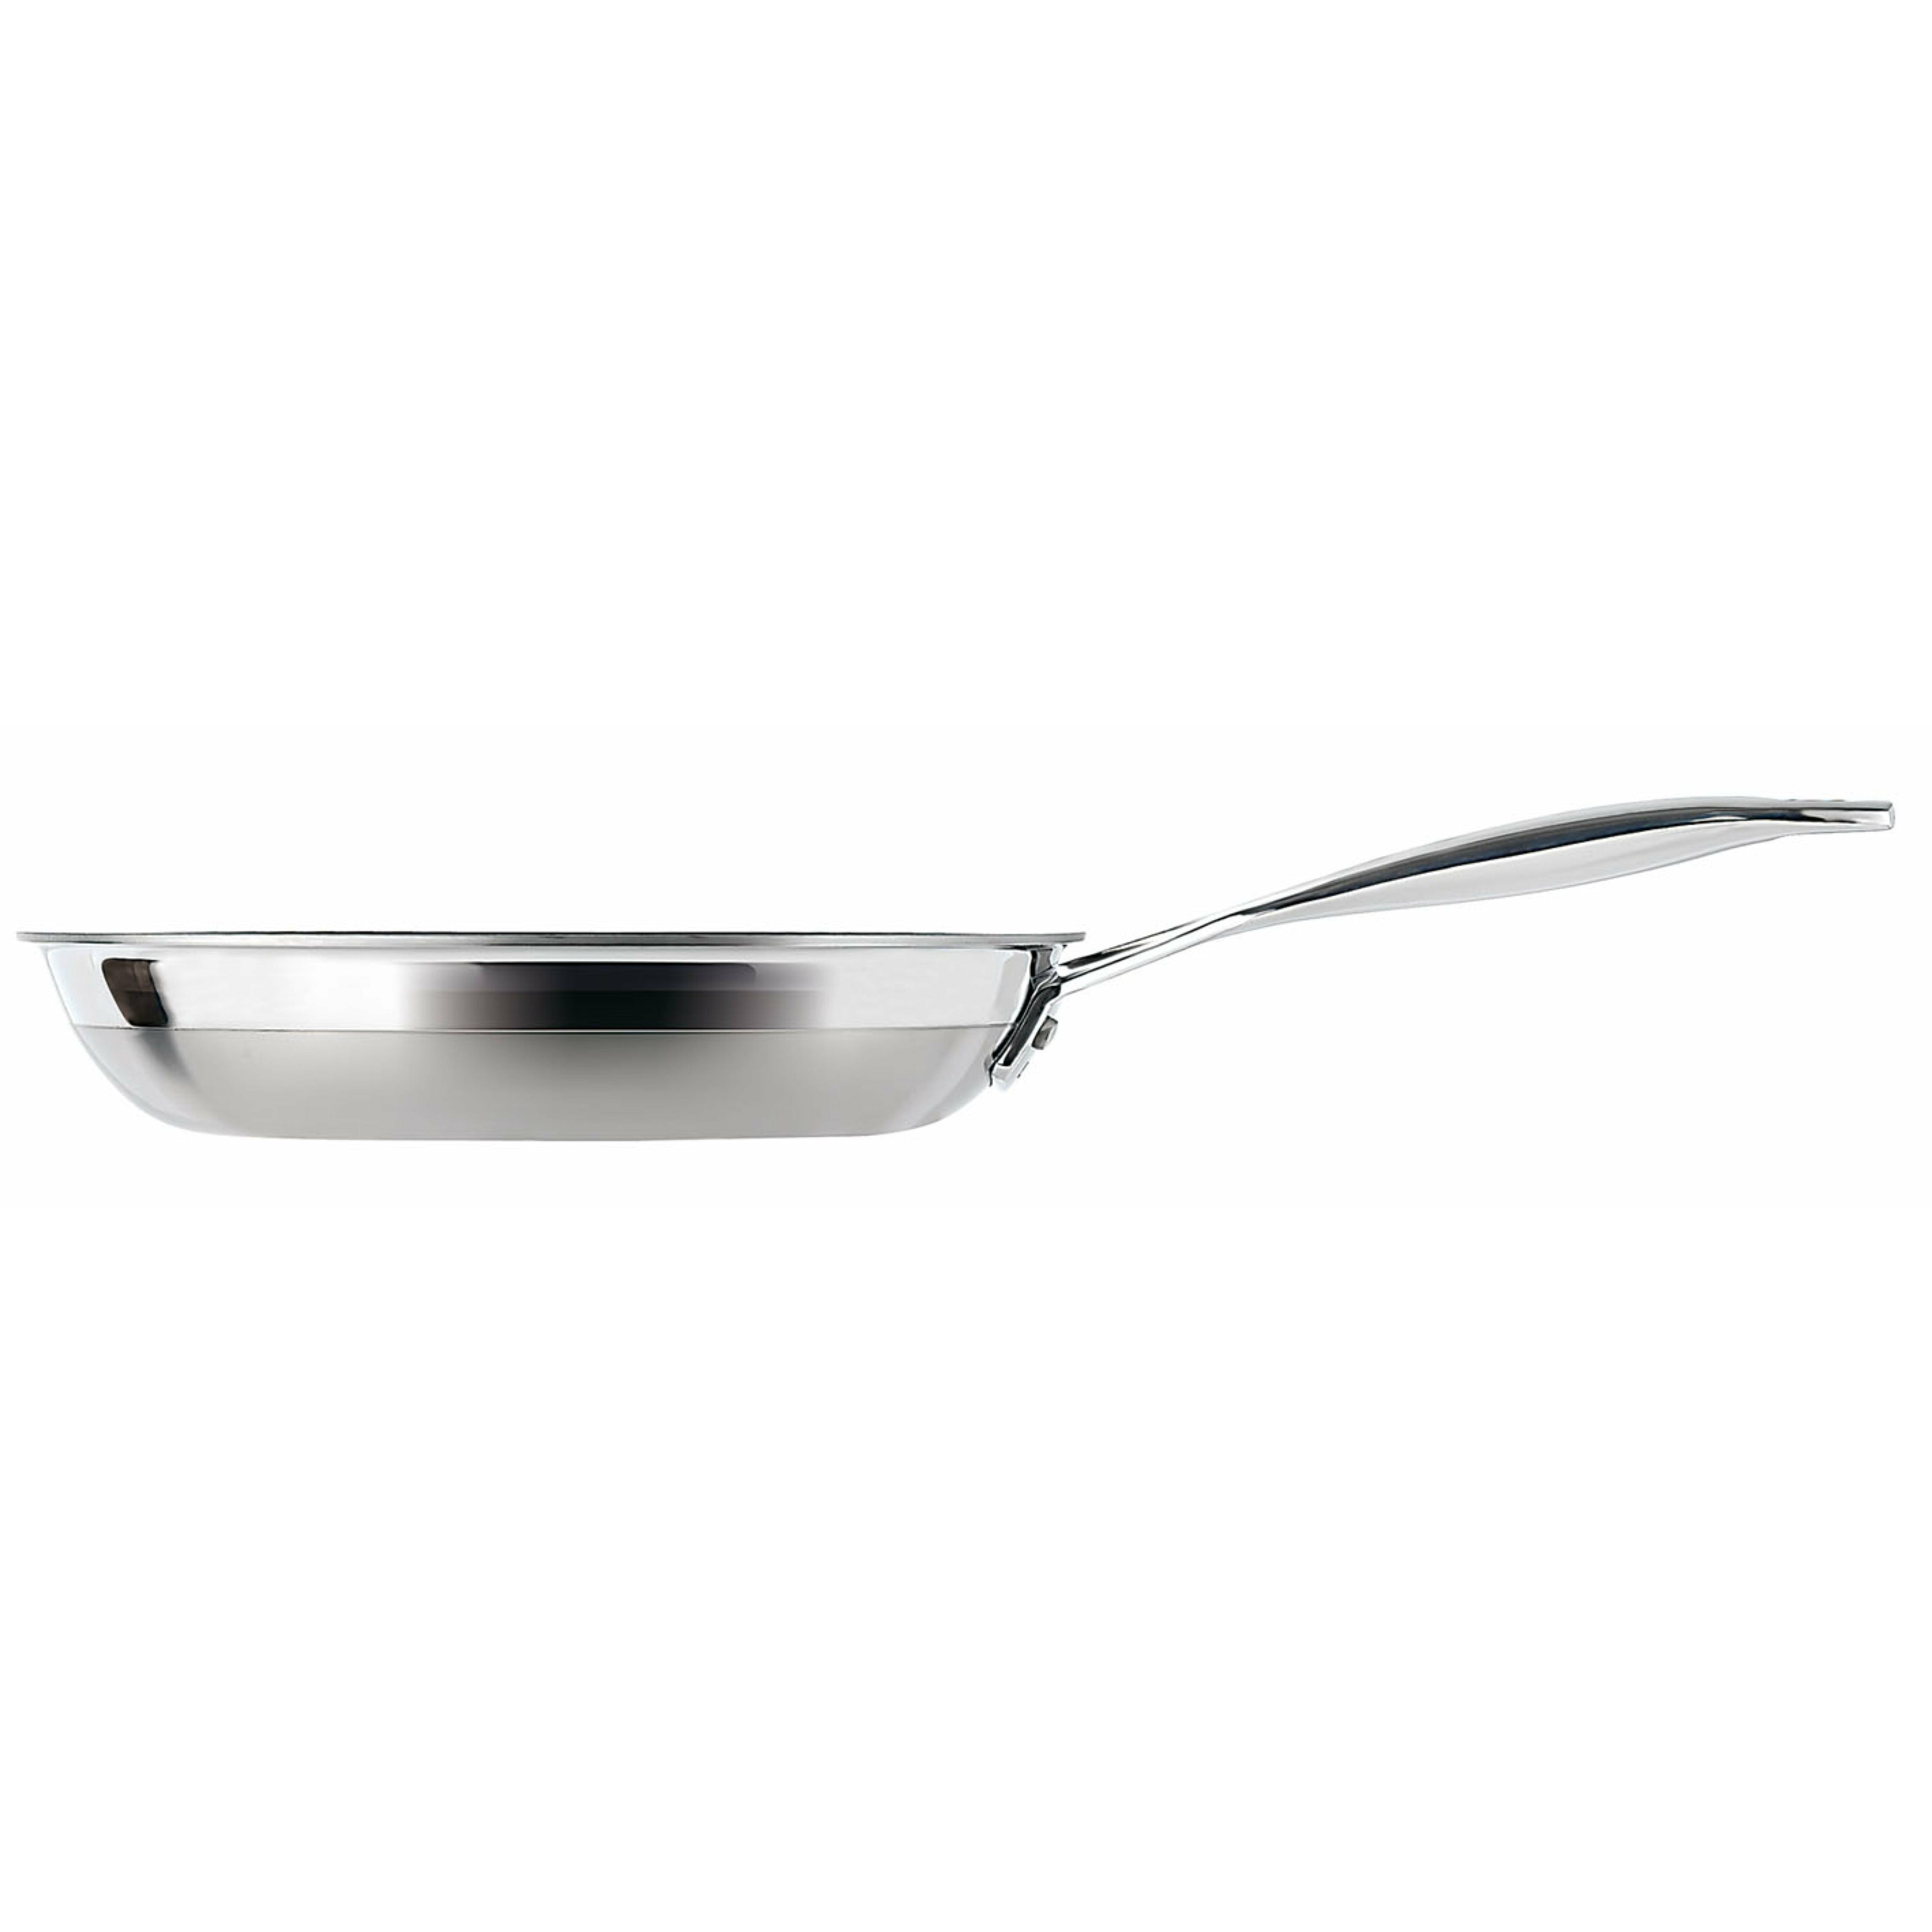 Le Creuset 3 Ply Stainless Steel Non Stick Frying Pan, 20 Cm